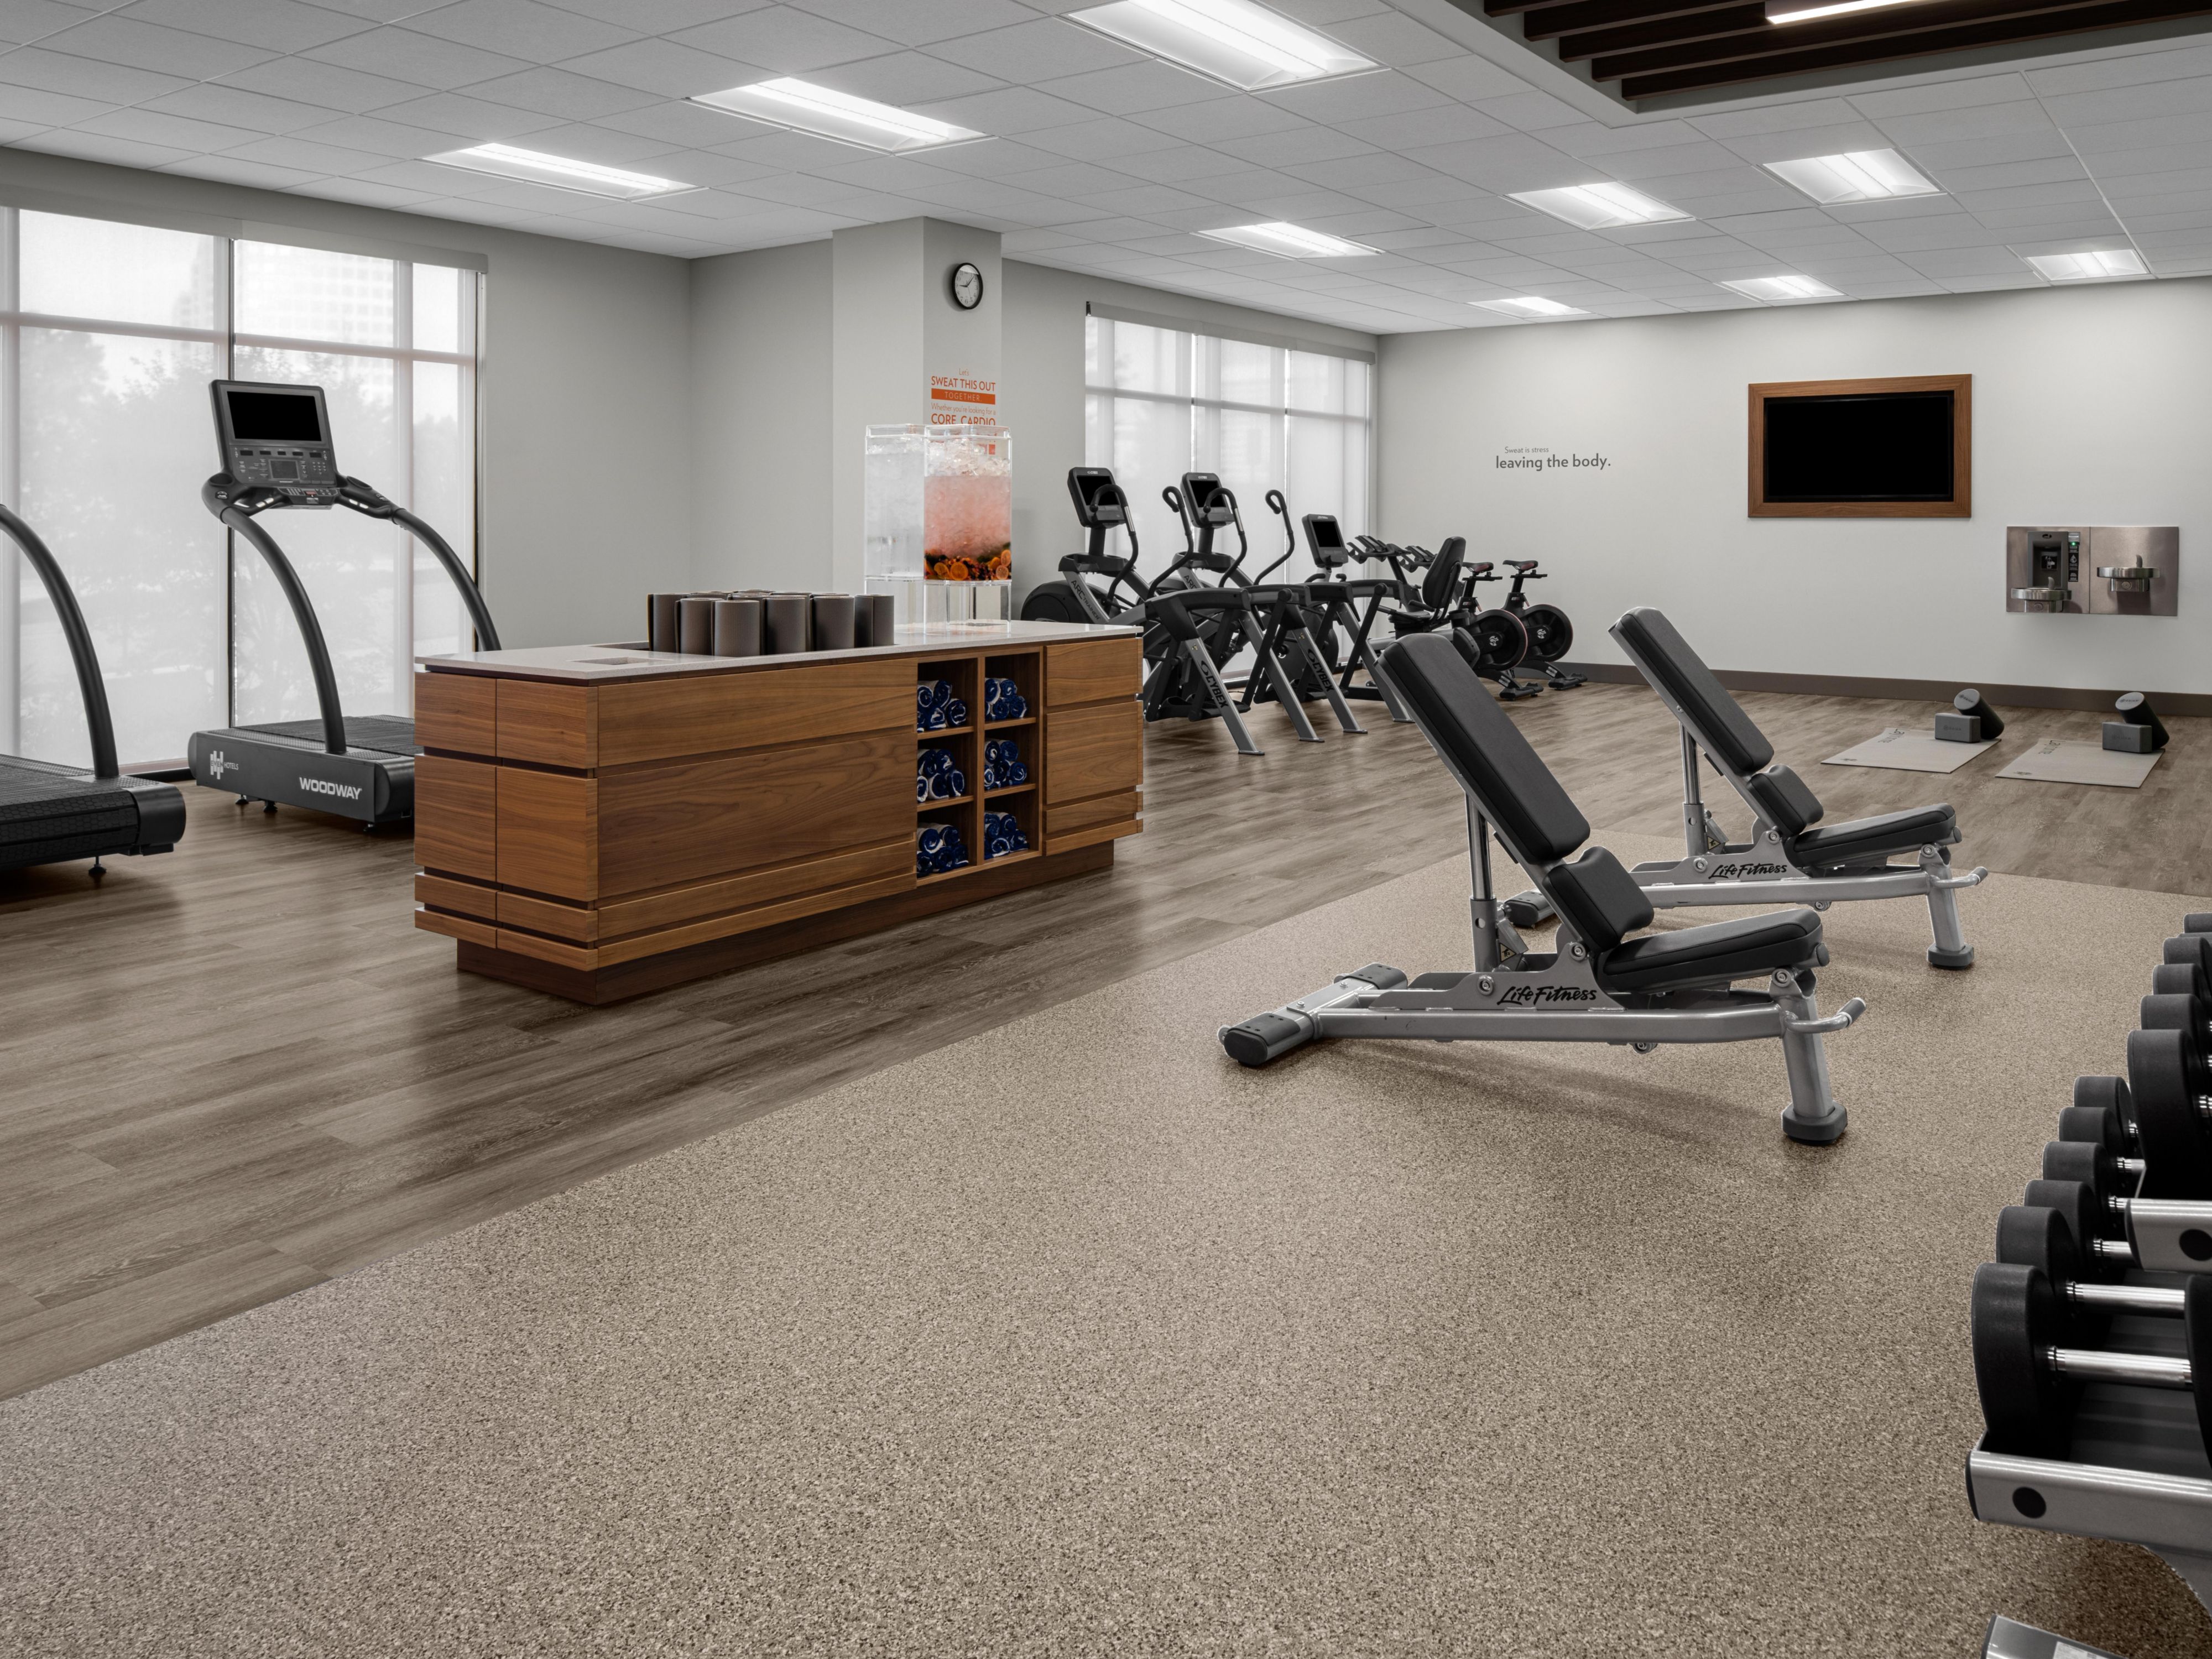 Open 24/7, our athletic studio offers the flexibility and freedom you need to maintain a healthy lifestyle while traveling. With state-of-the-art equipment, group classes, and personalized activities, we offer everything you need for cardio, yoga, and weight inspired workouts.